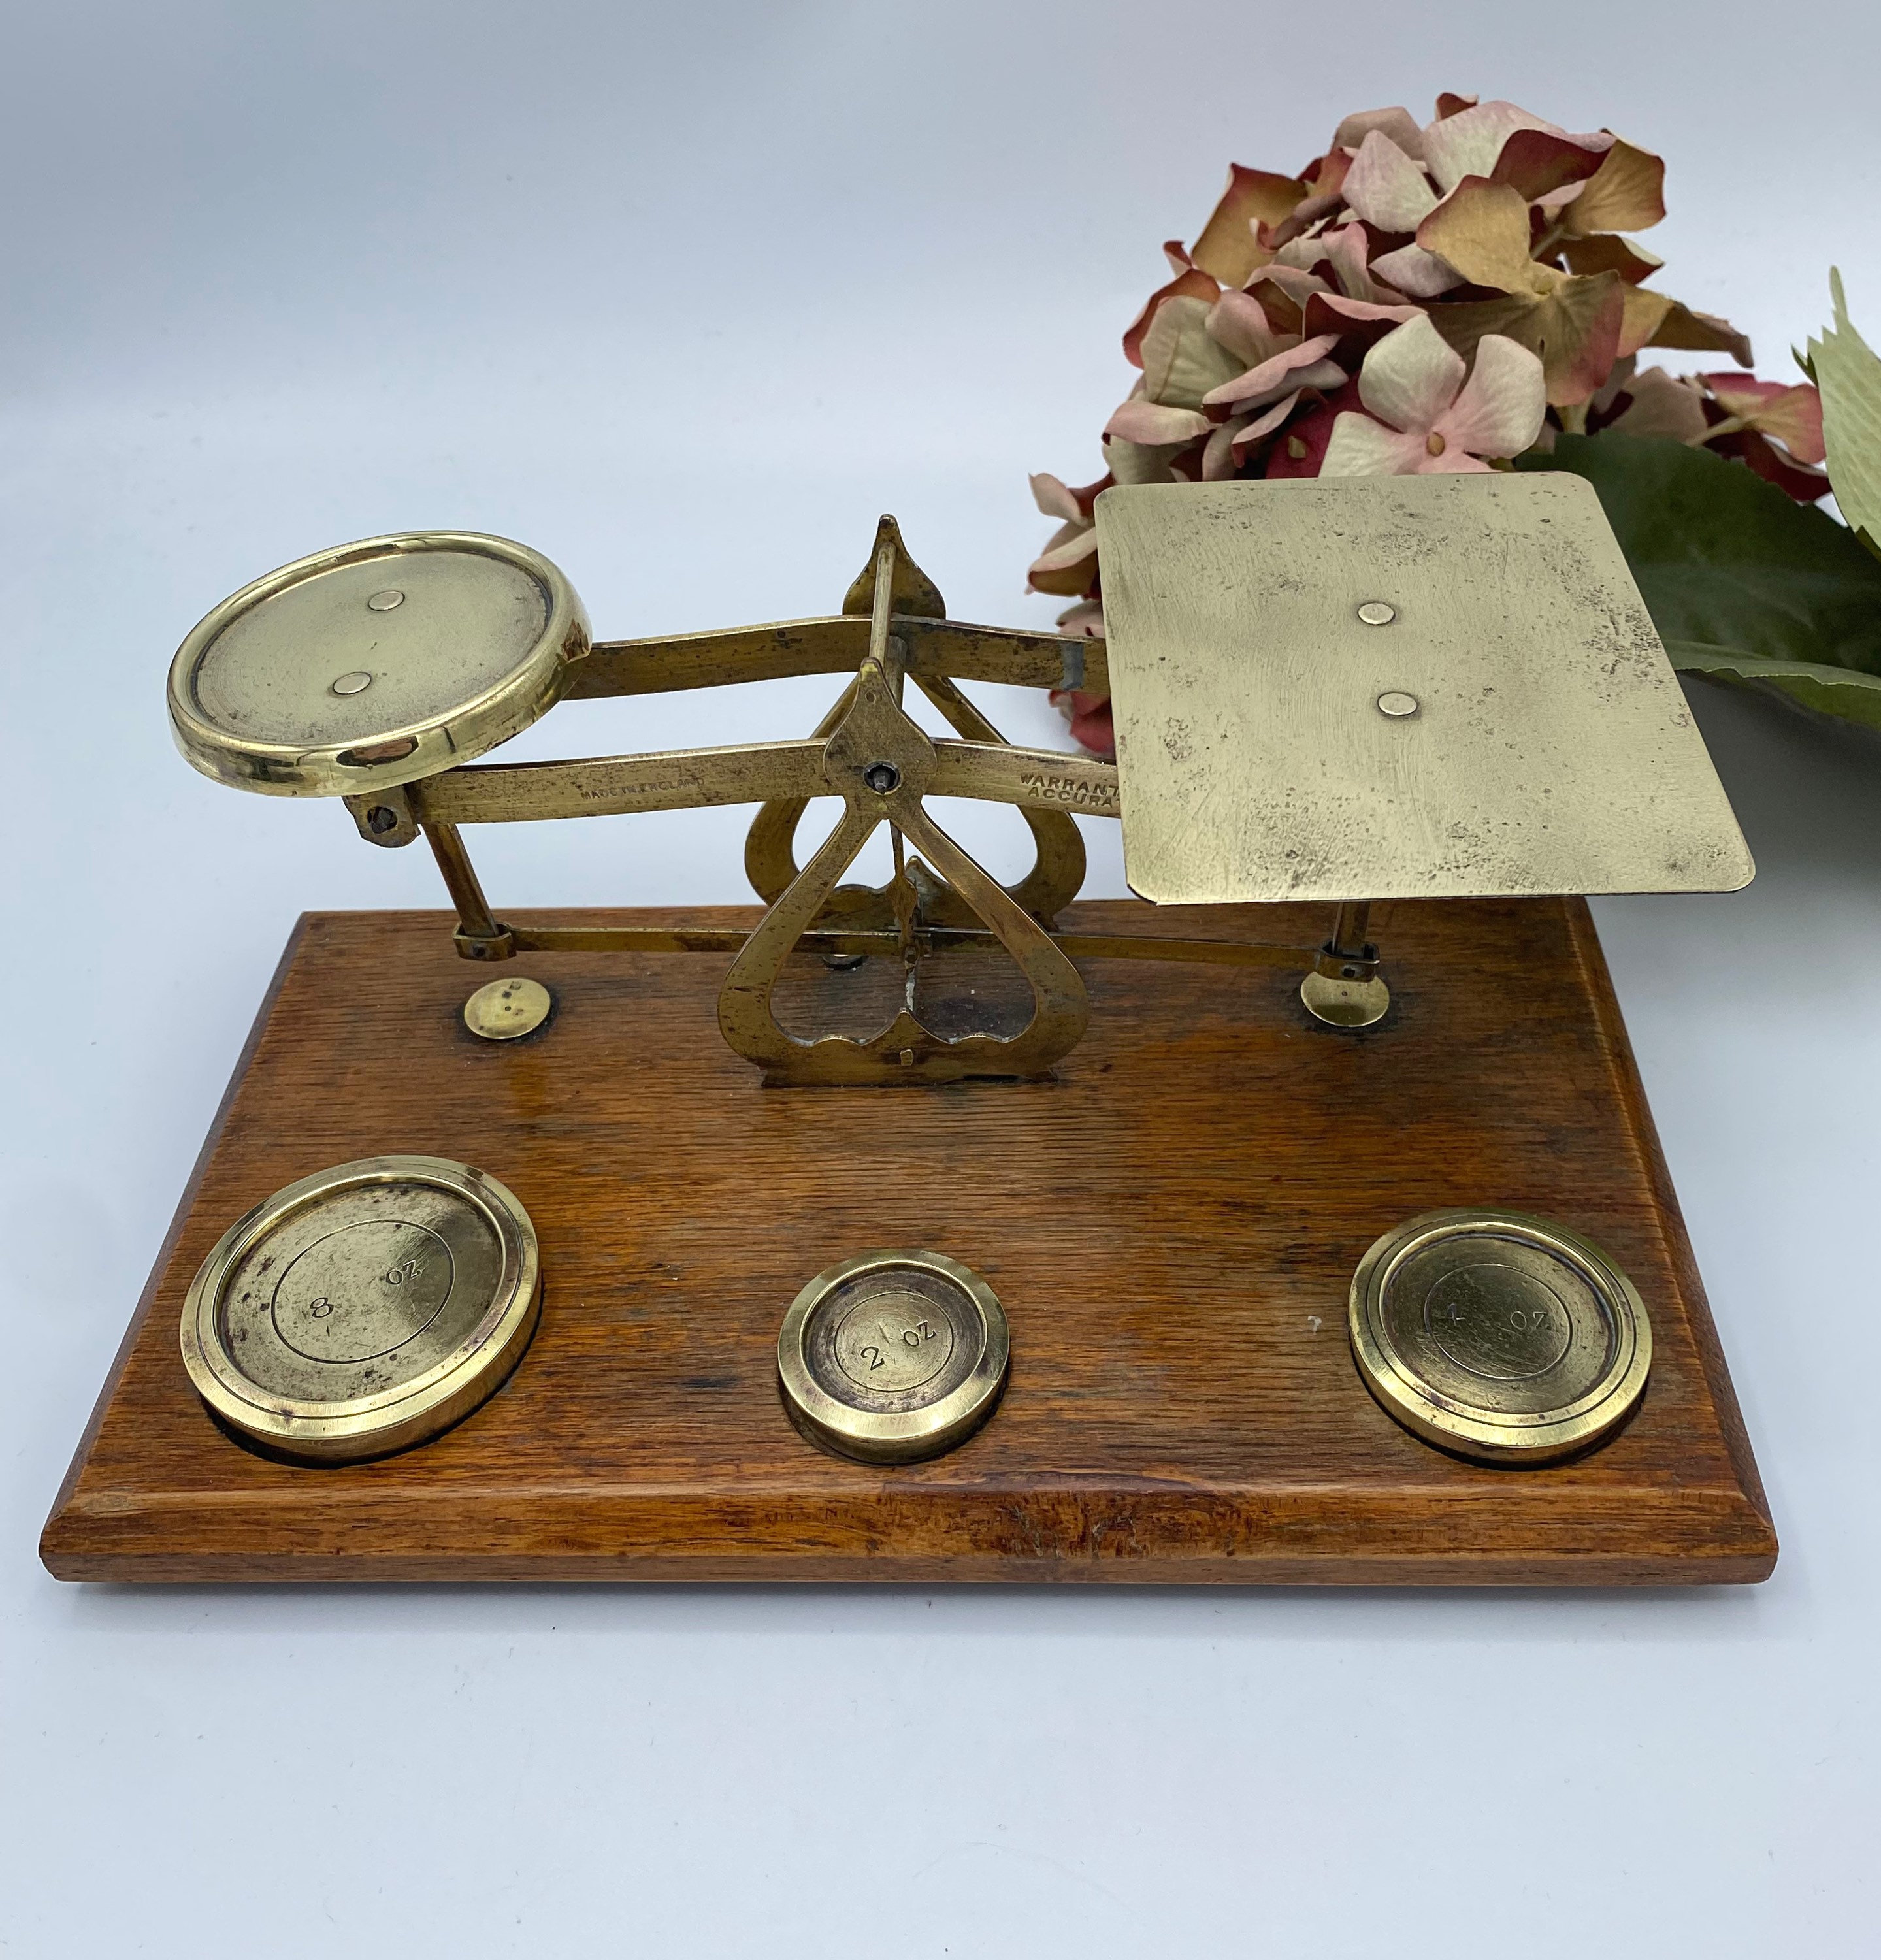 Vintage Pelouze Scale Mfg Co Miniature Star Postal Scales ,chicago Patent  1896, Small Letter Scales 